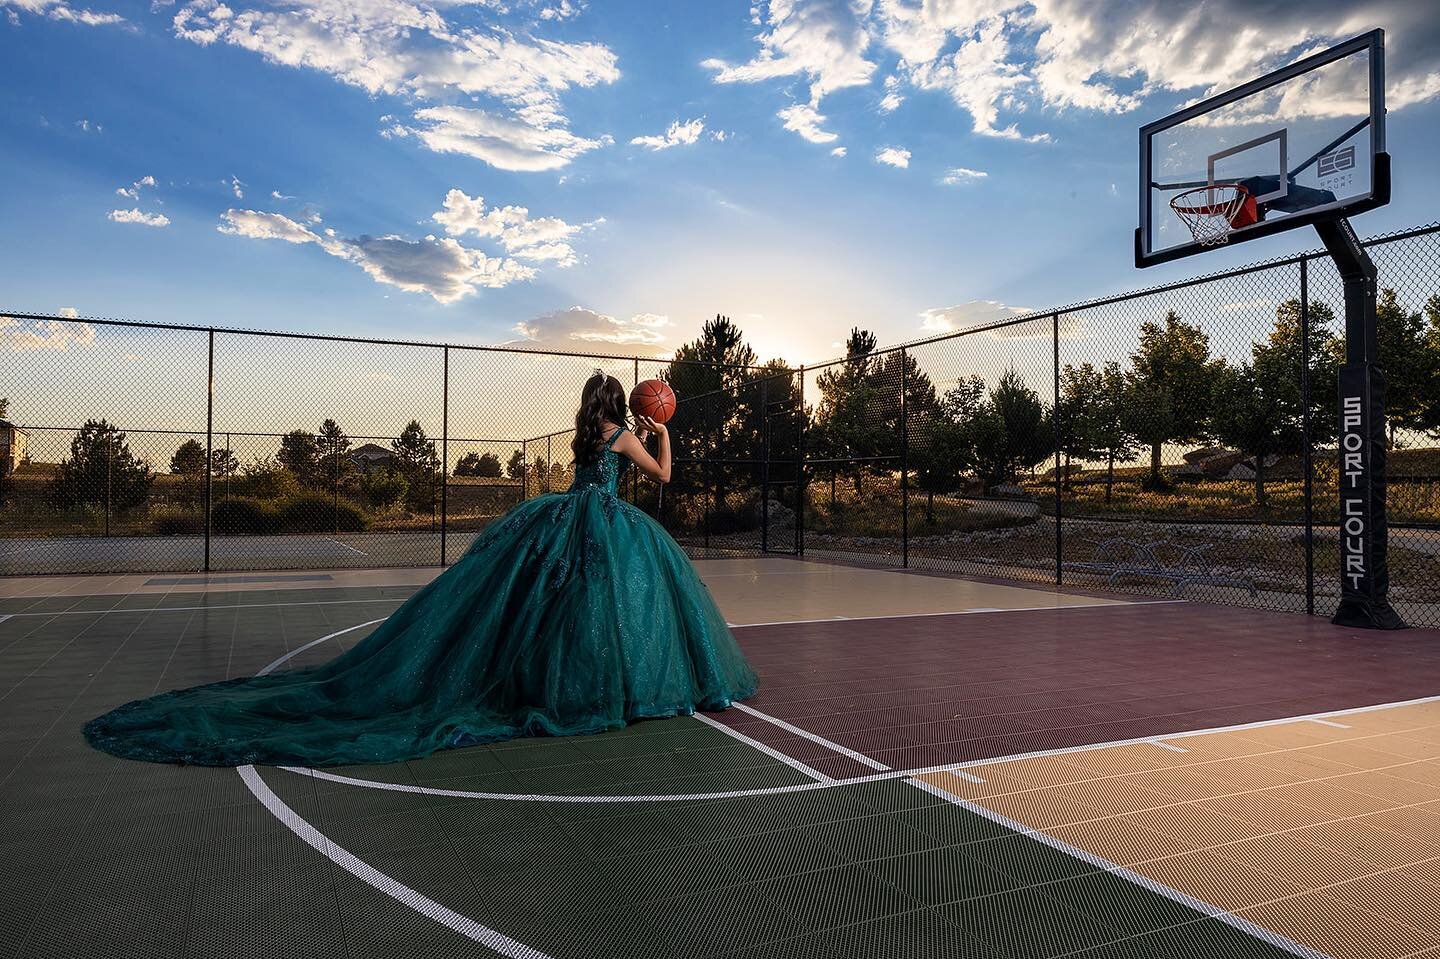 &ldquo;Can you Incorporate my passion into your photos?&rdquo; &hellip;&hellip;. I understood the assignment!!!
.
.
#basketball #ballislife #🏀 #quincea&ntilde;era #quince #quincedress #quincea&ntilde;os #photooftheday #photography #photographer #gra